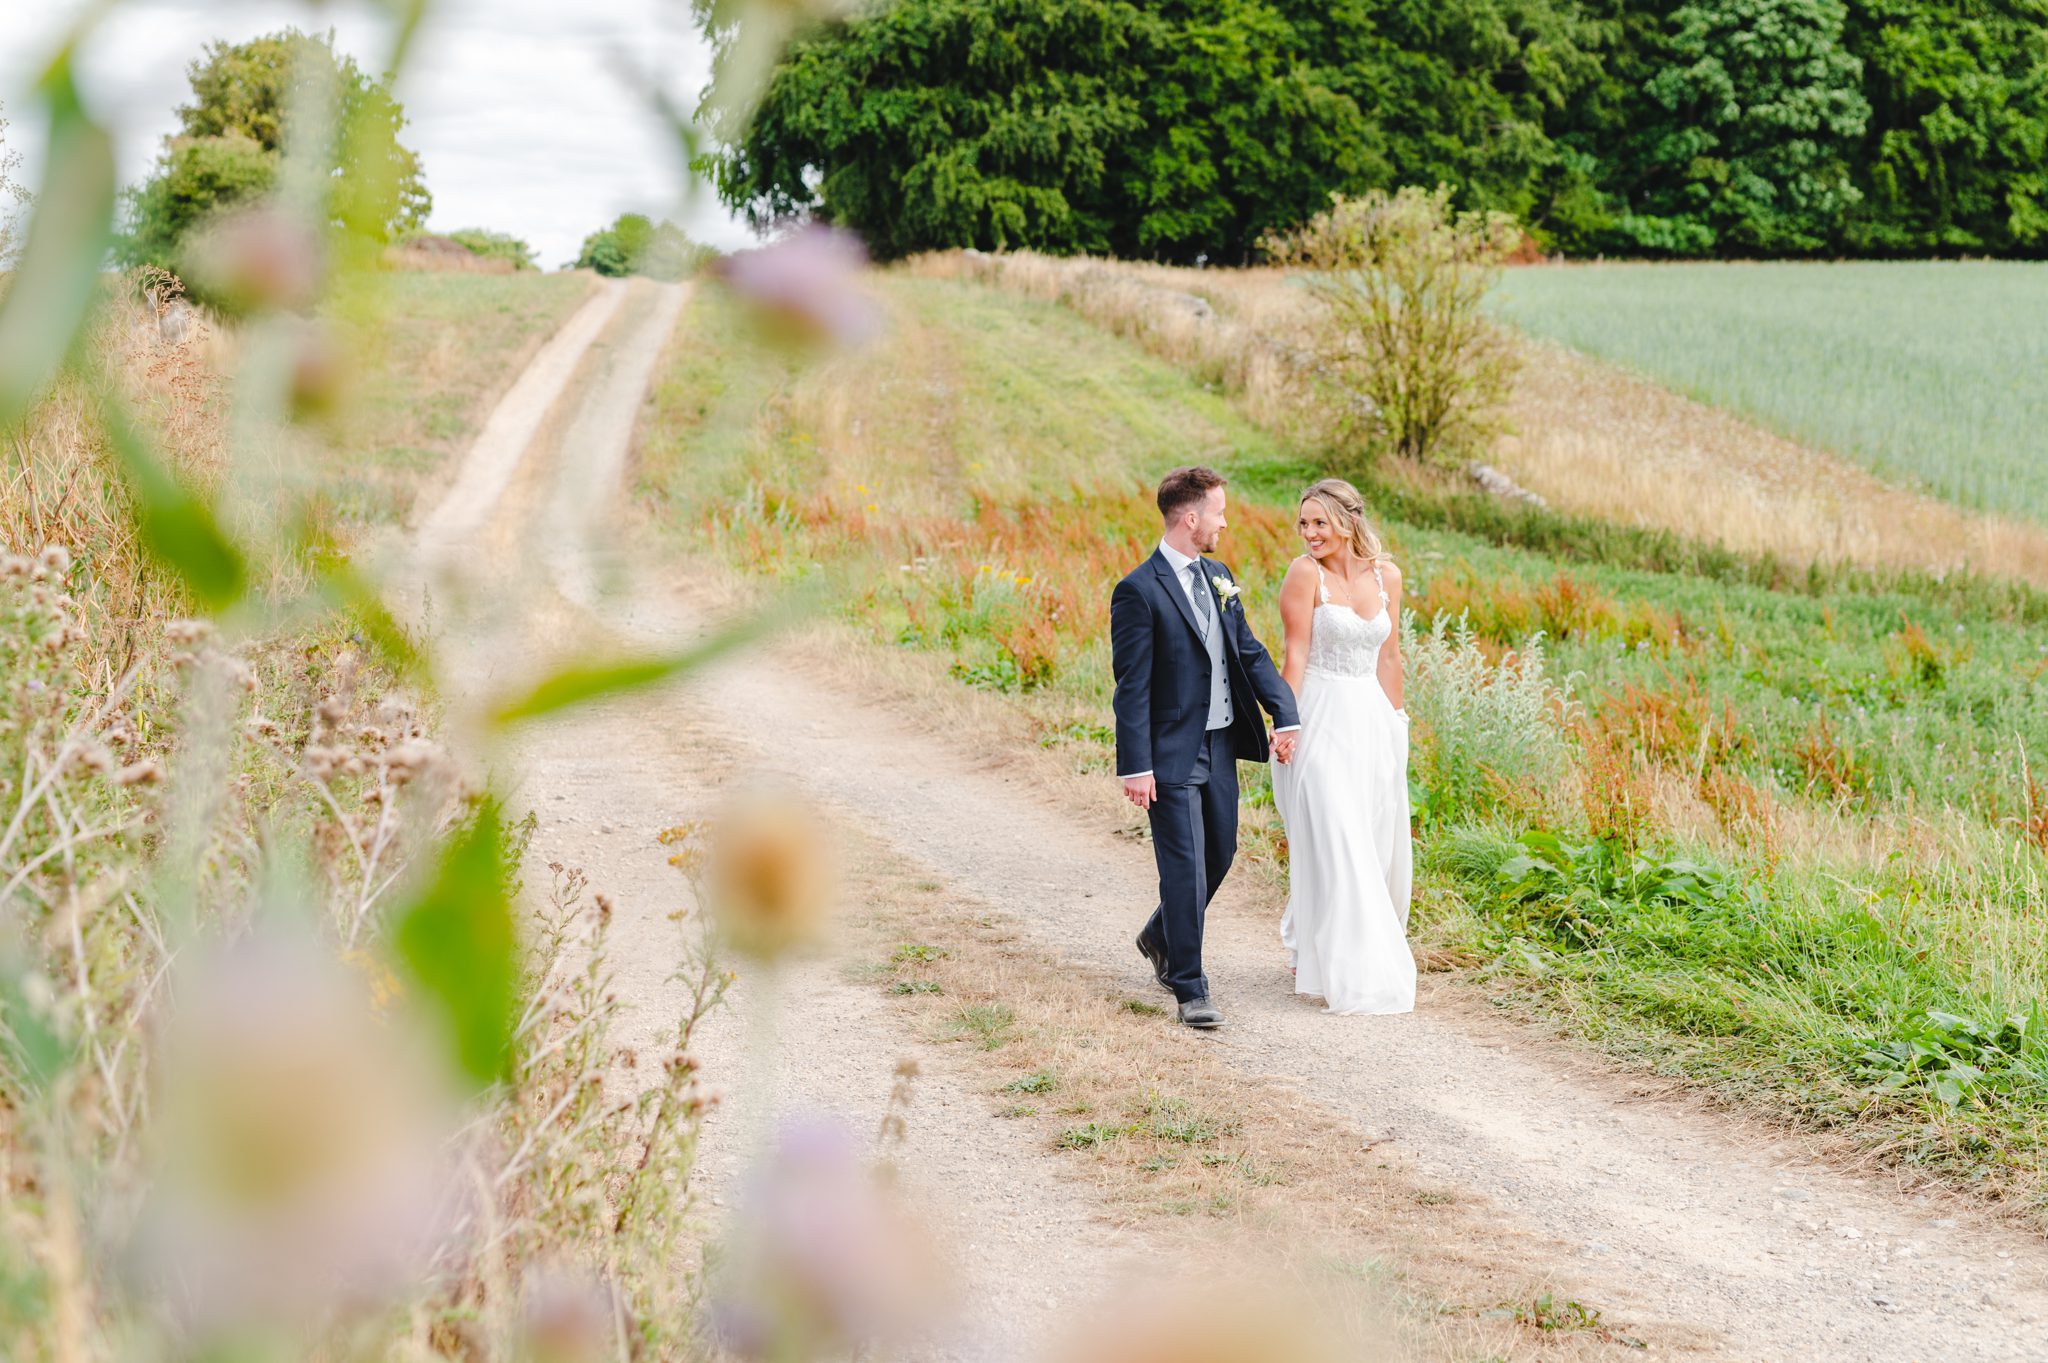 Bride and groom walking in the Cotswolds Countryside